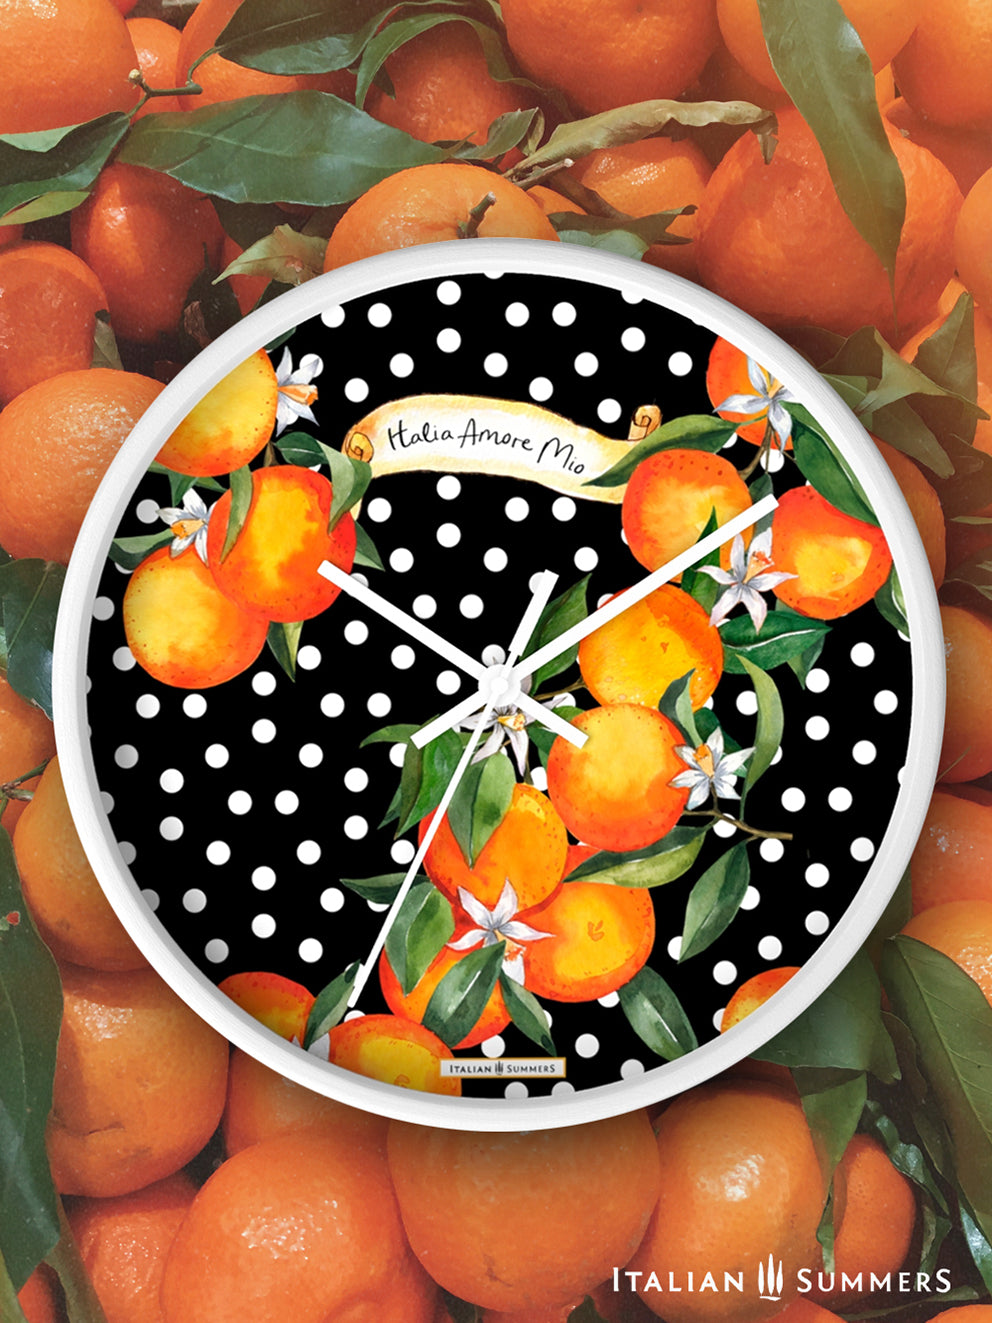 Wall clock SICILIAN GARDEN bursts with color, from the happy white polka dots to the lively orange blossoms. The timeless phrase 'Italia Amore Mio' adds a meaningful touch of love. Designed and sold by Italian Summers